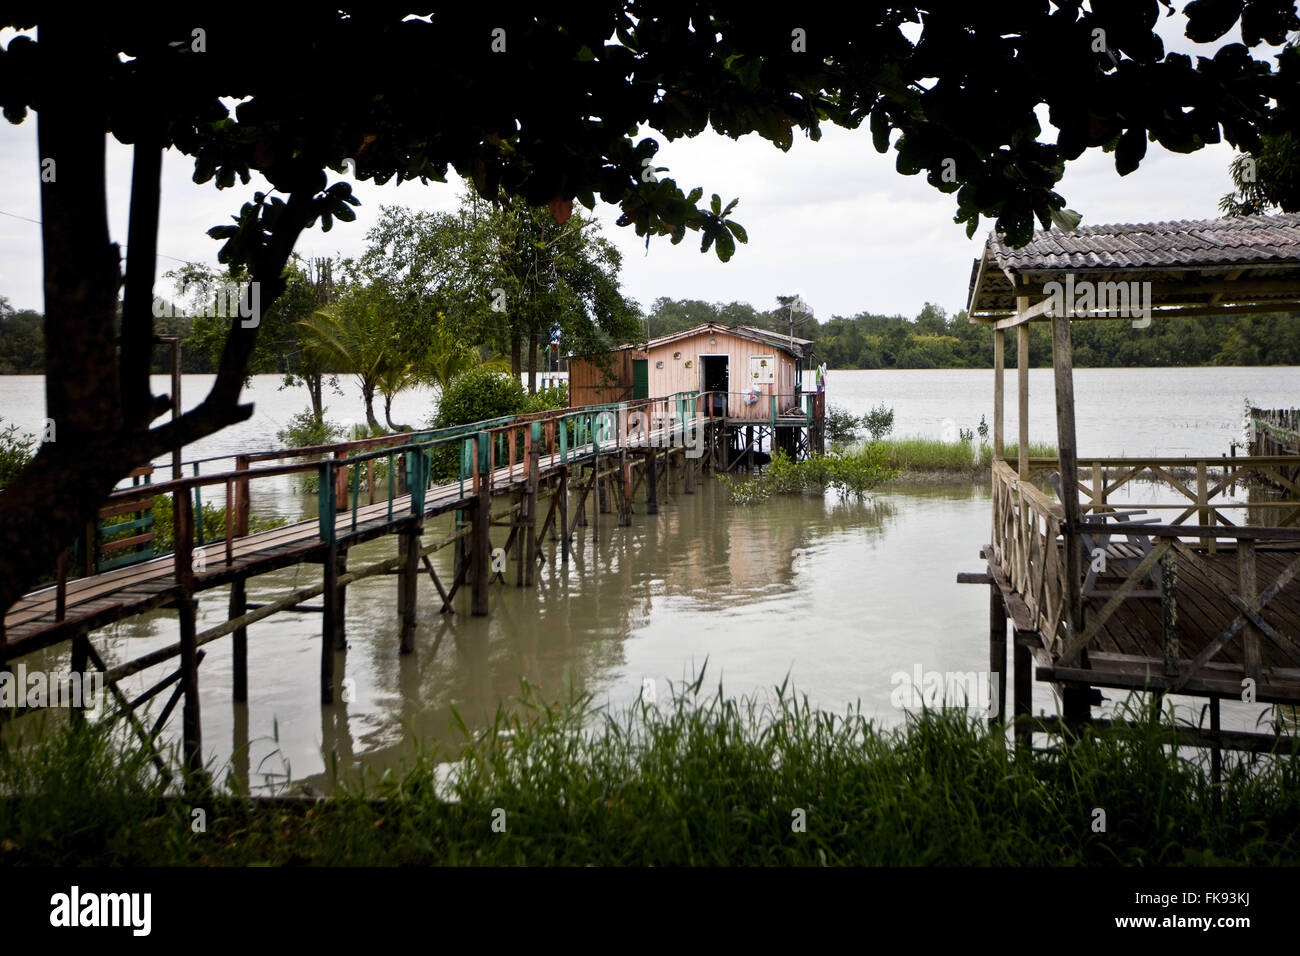 House with pier - widely used in the Amazon region by inhabitants - District of Porto Salvo Stock Photo